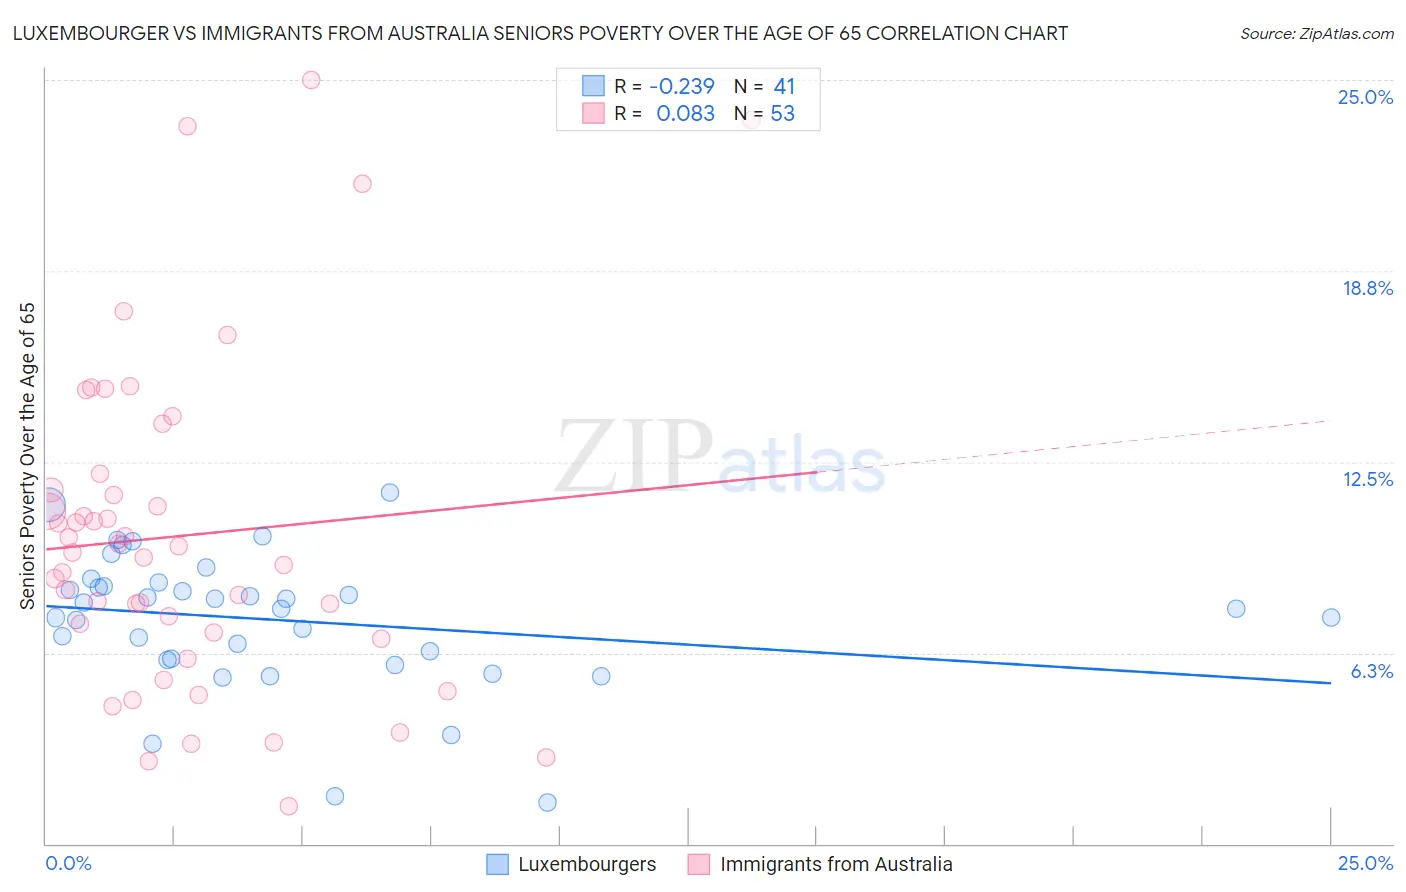 Luxembourger vs Immigrants from Australia Seniors Poverty Over the Age of 65